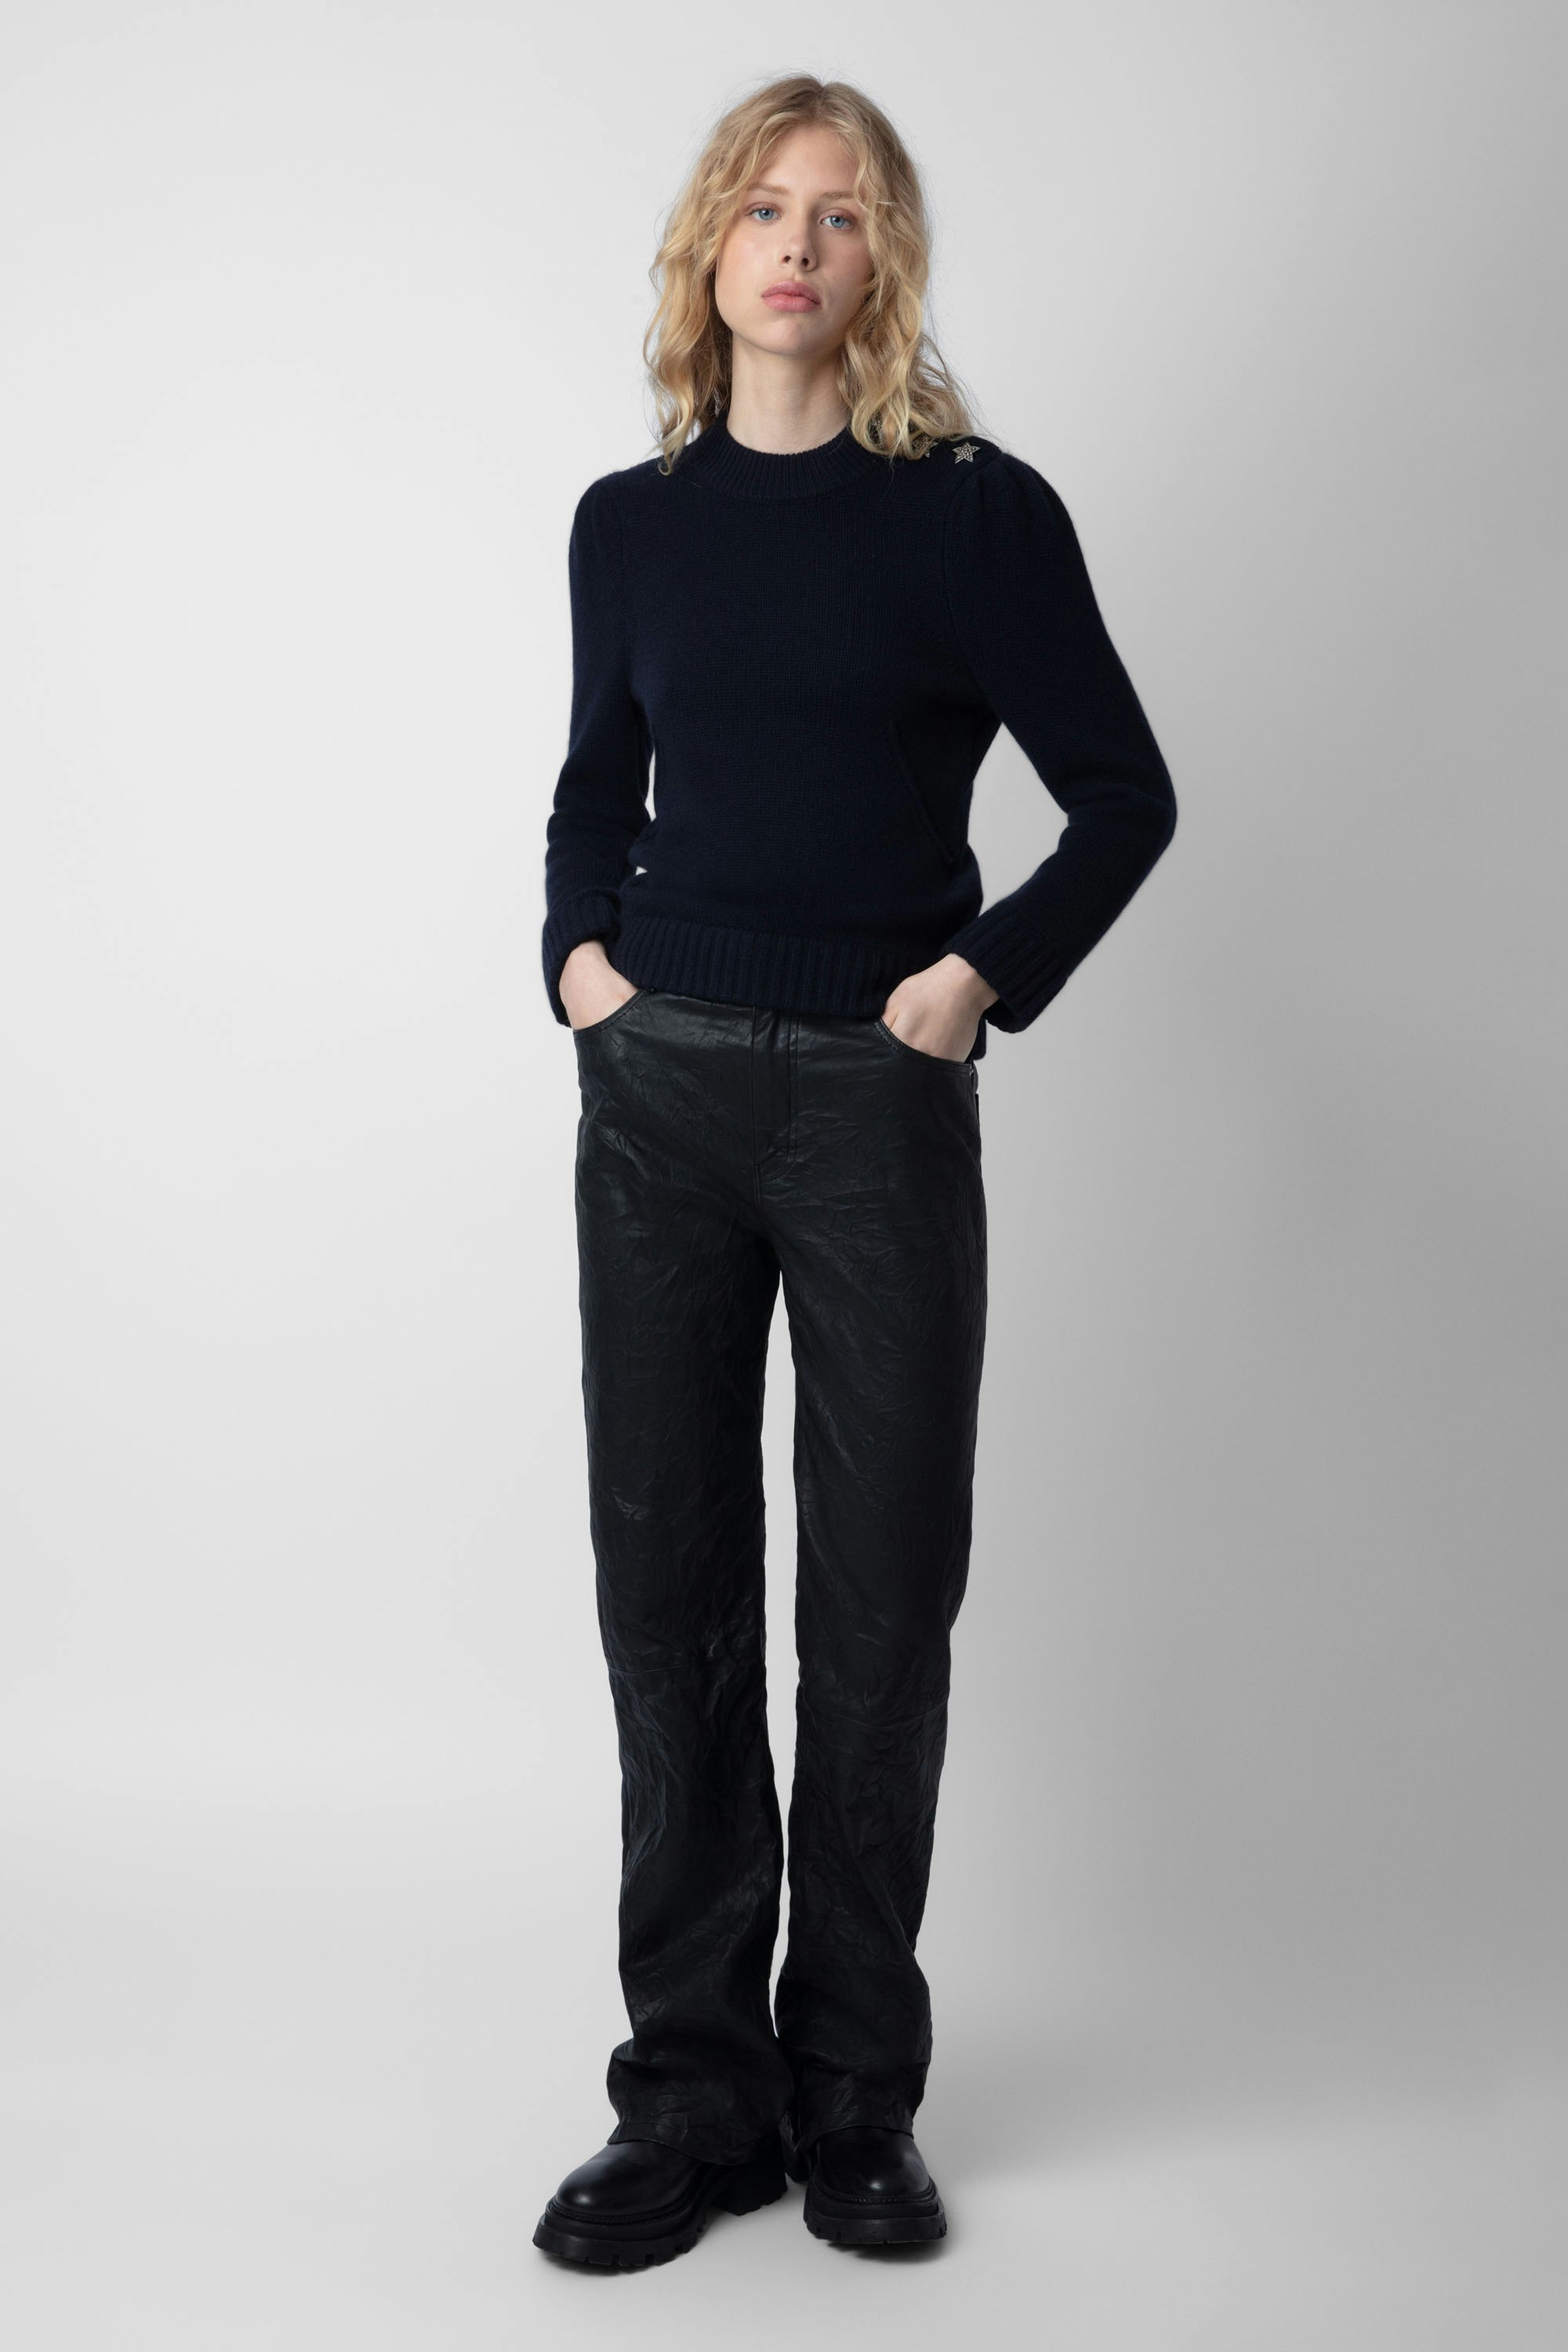 Betson Jewelled Cashmere Sweater - Women's navy blue cashmere sweater with star-shaped jewelled buttons on the shoulders.